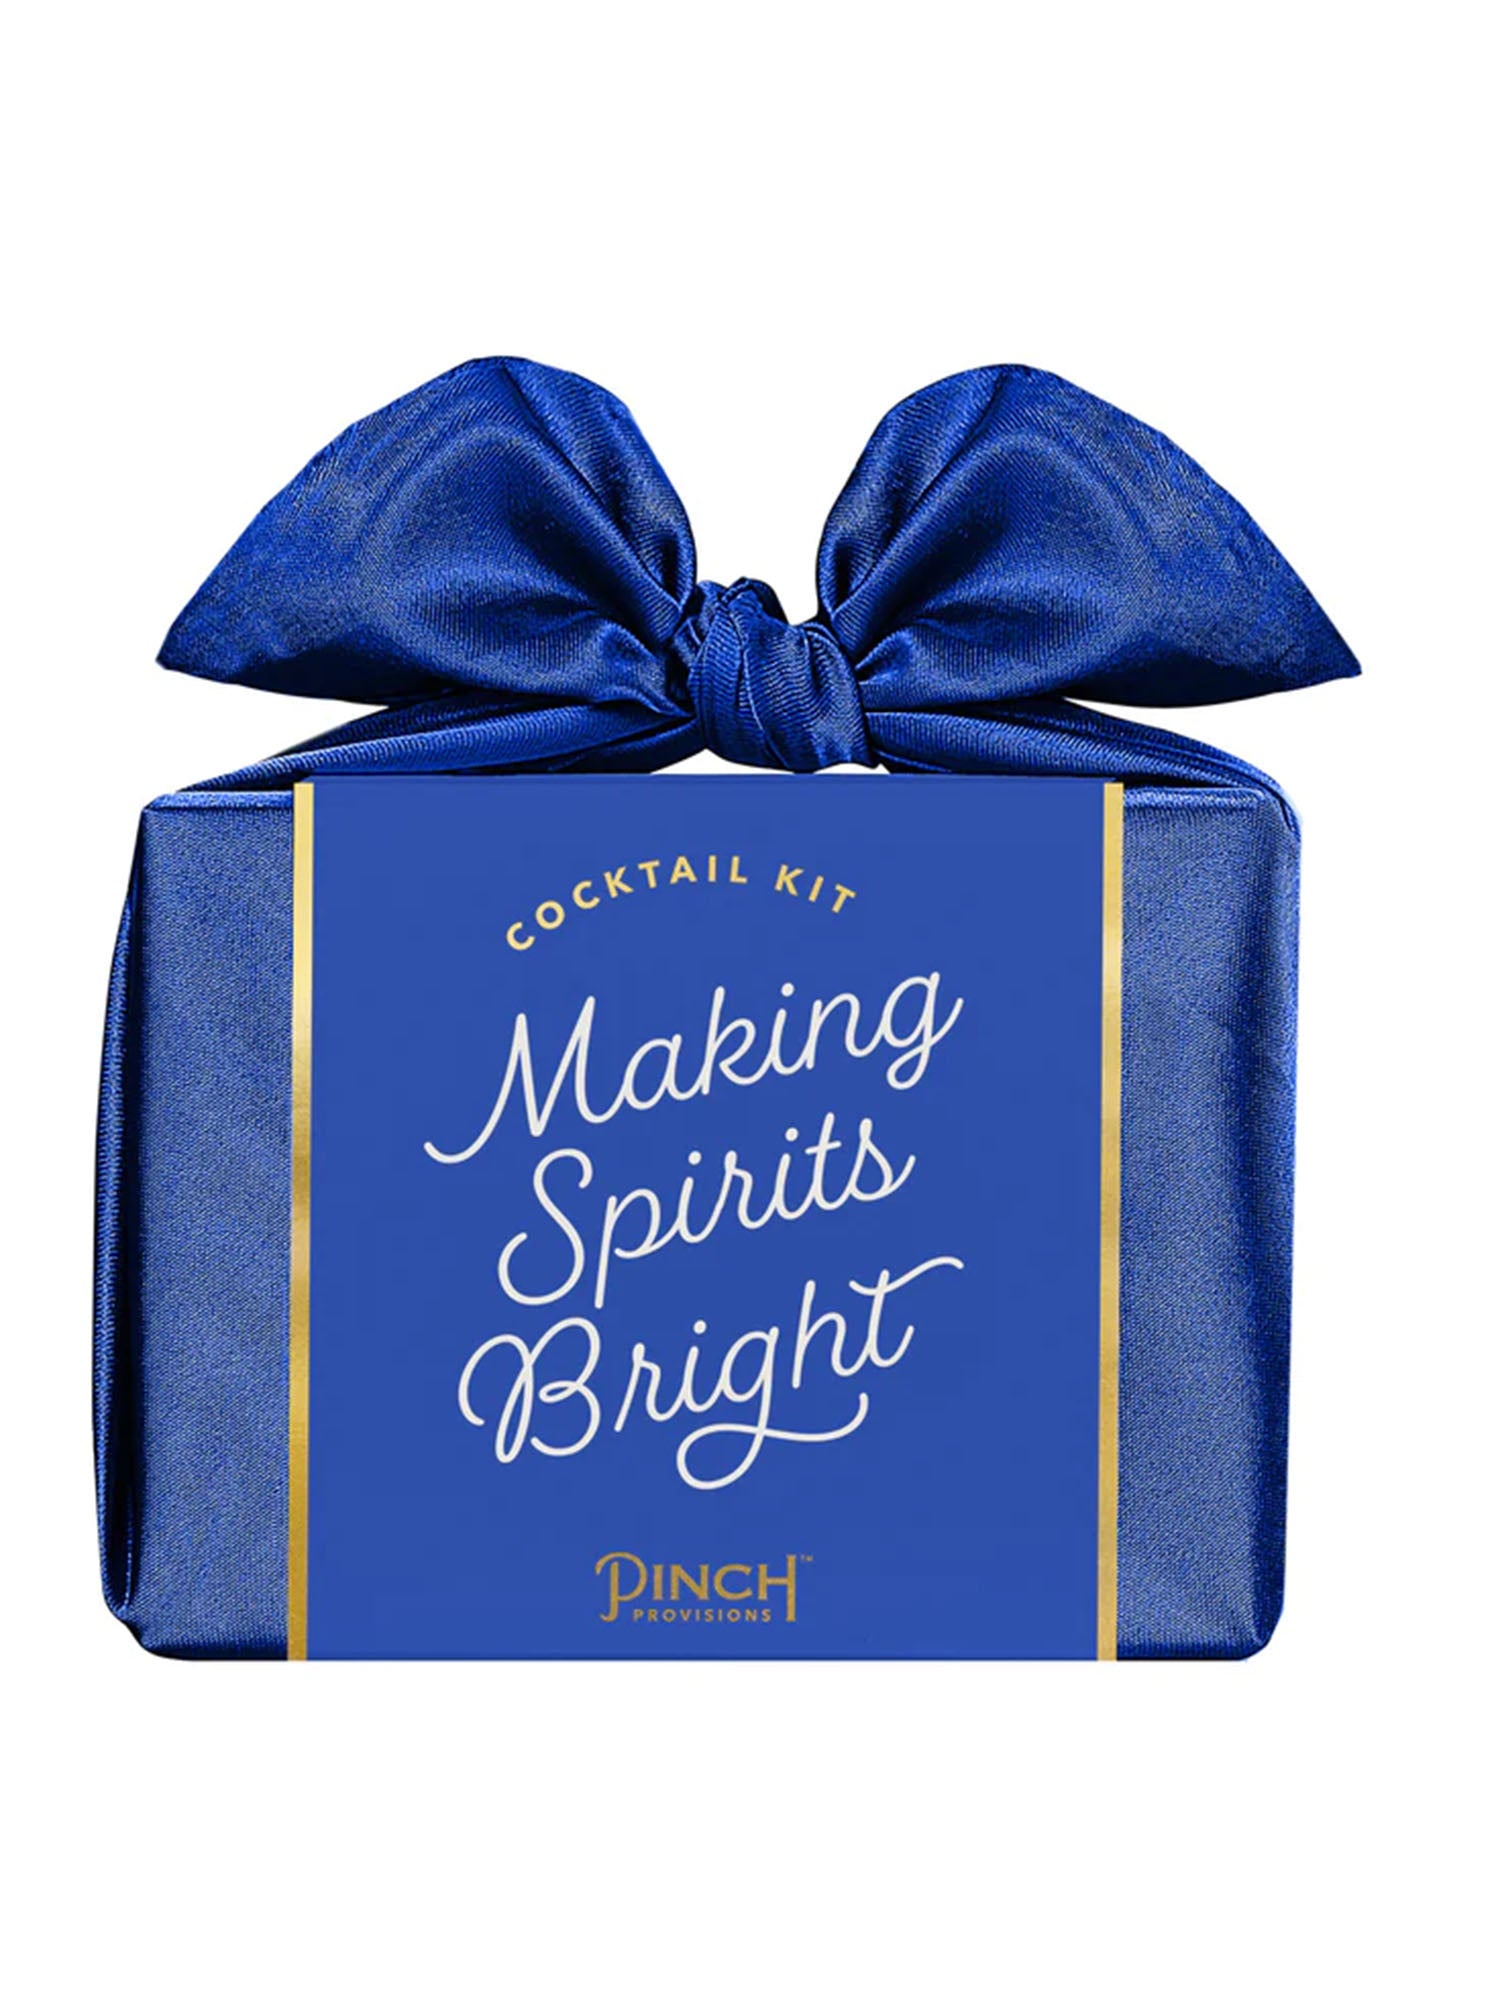 Pinch Provisions Making Spirits Bright Cocktail Kit - Brands We Love